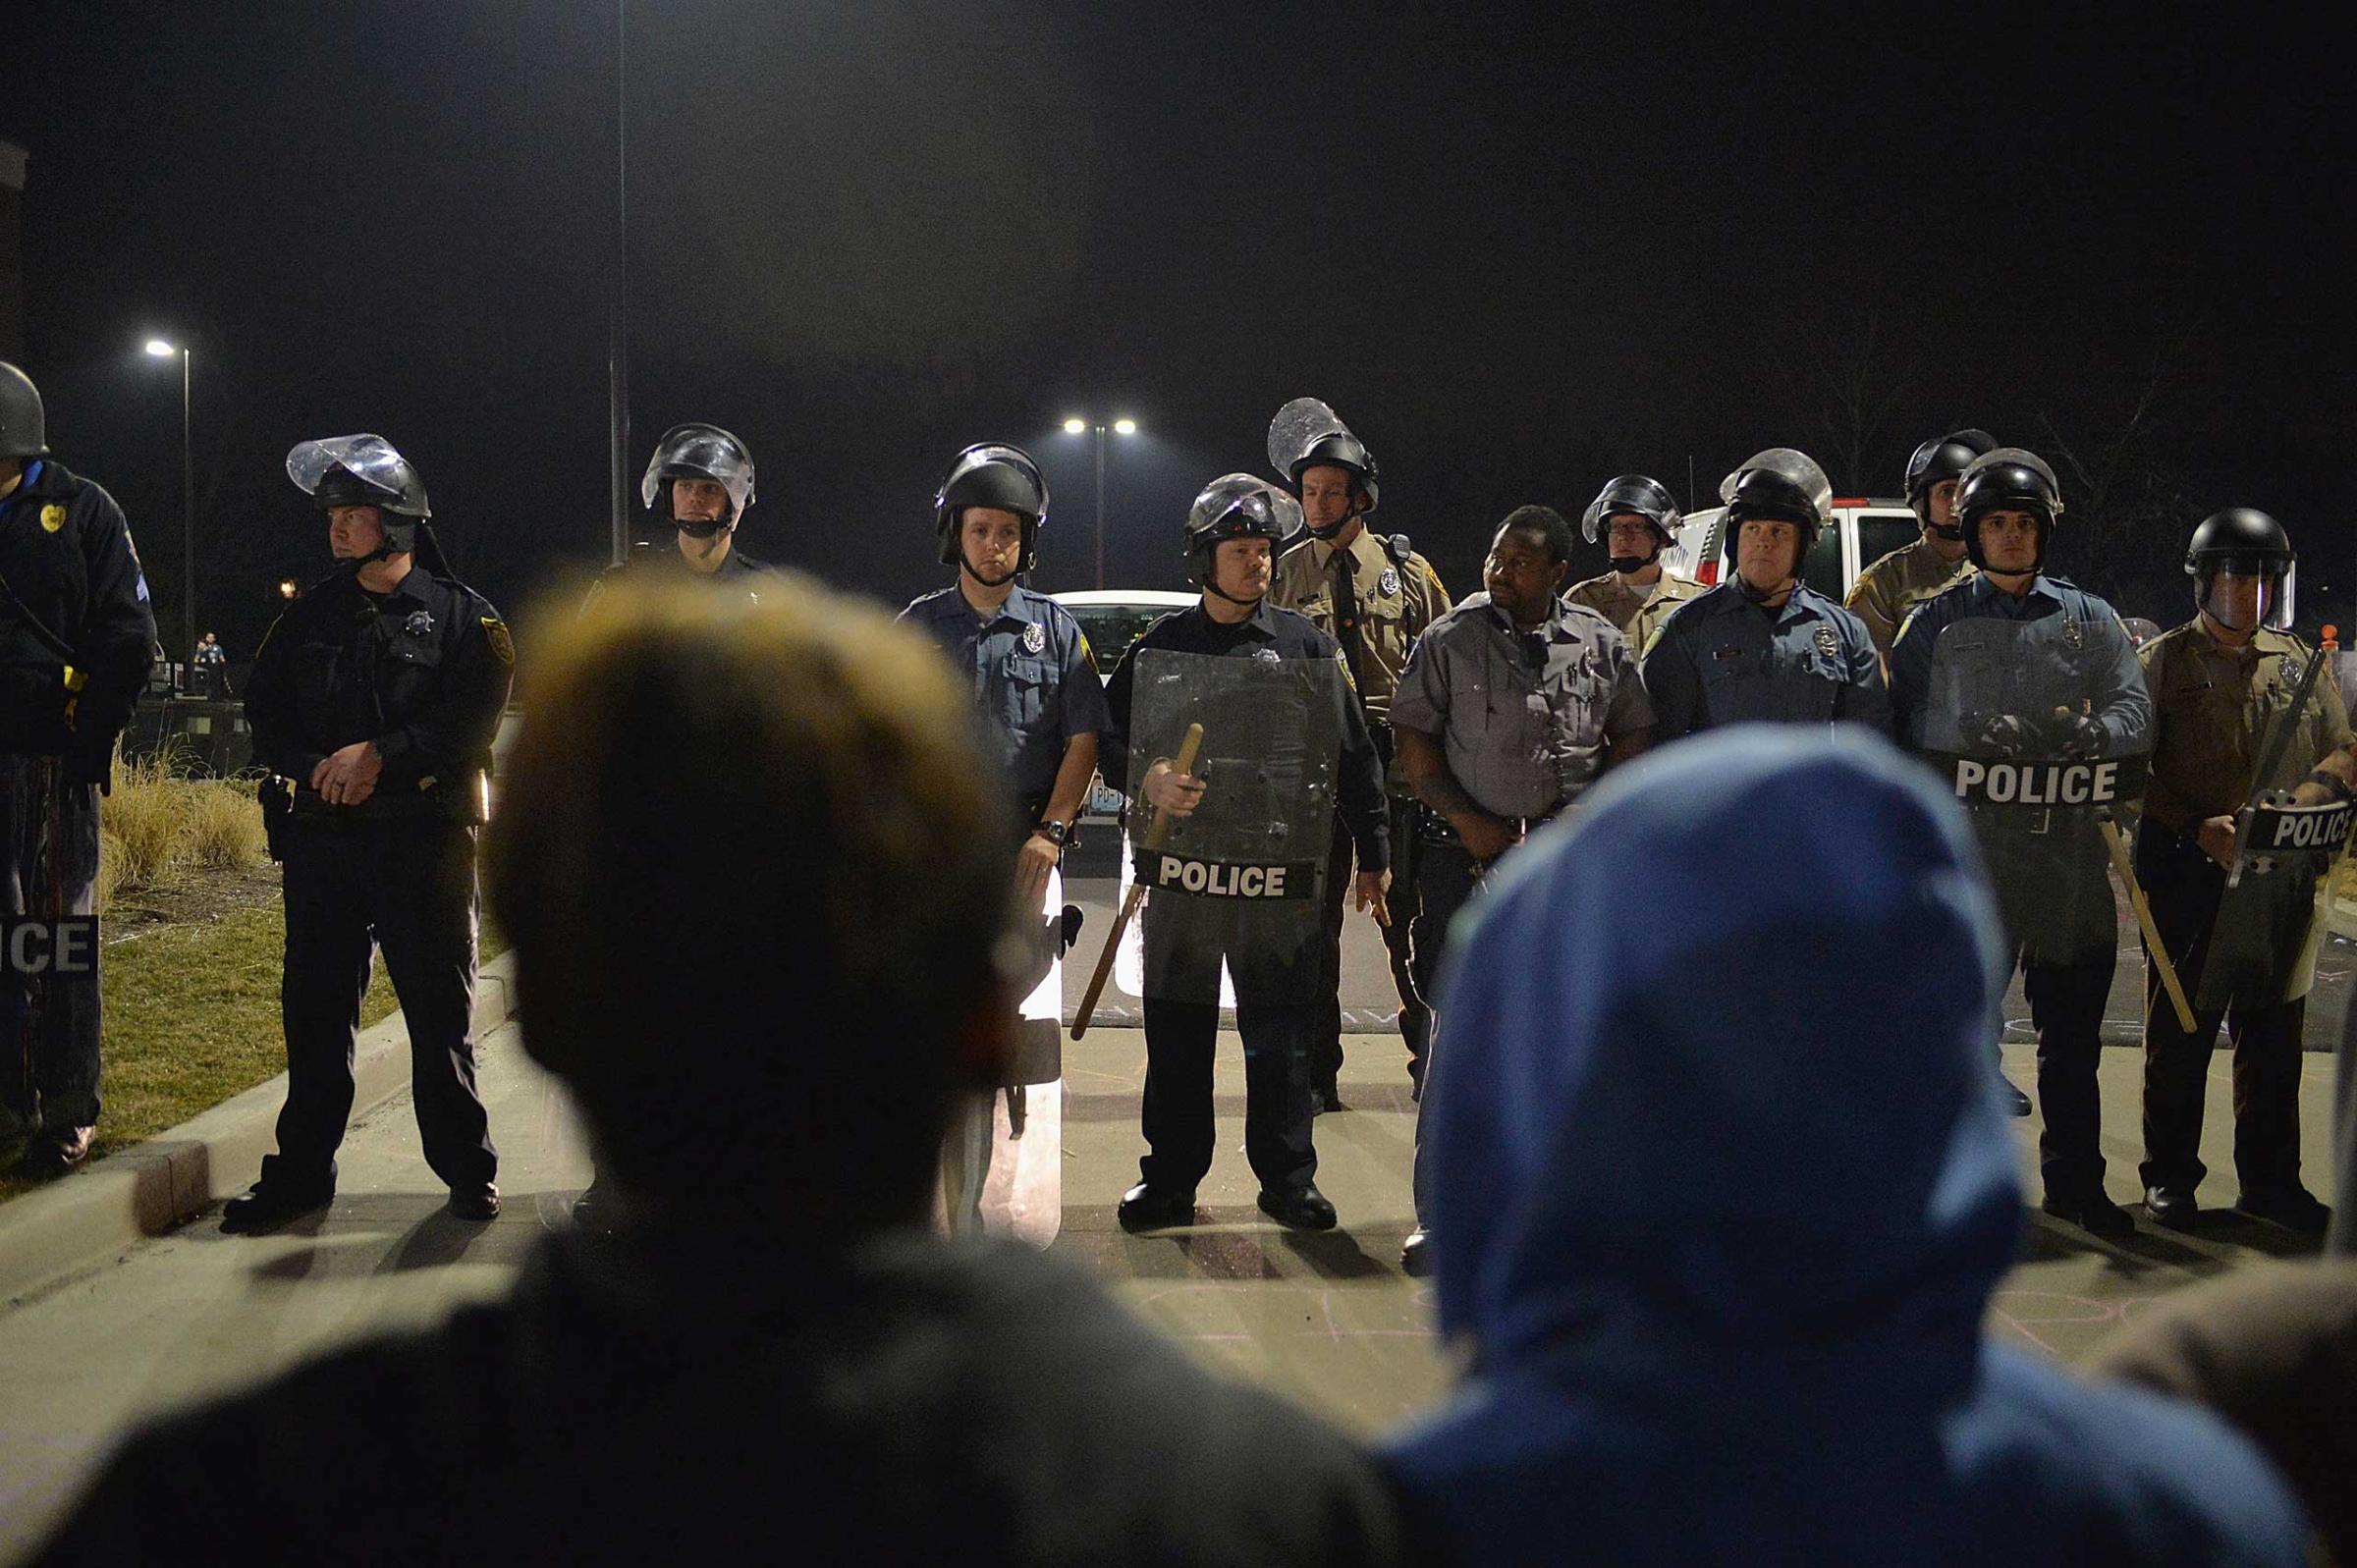 Police officers stand on alert during a protests outside the Ferguson Police Department on March 11, 2015 in Ferguson, Mo.